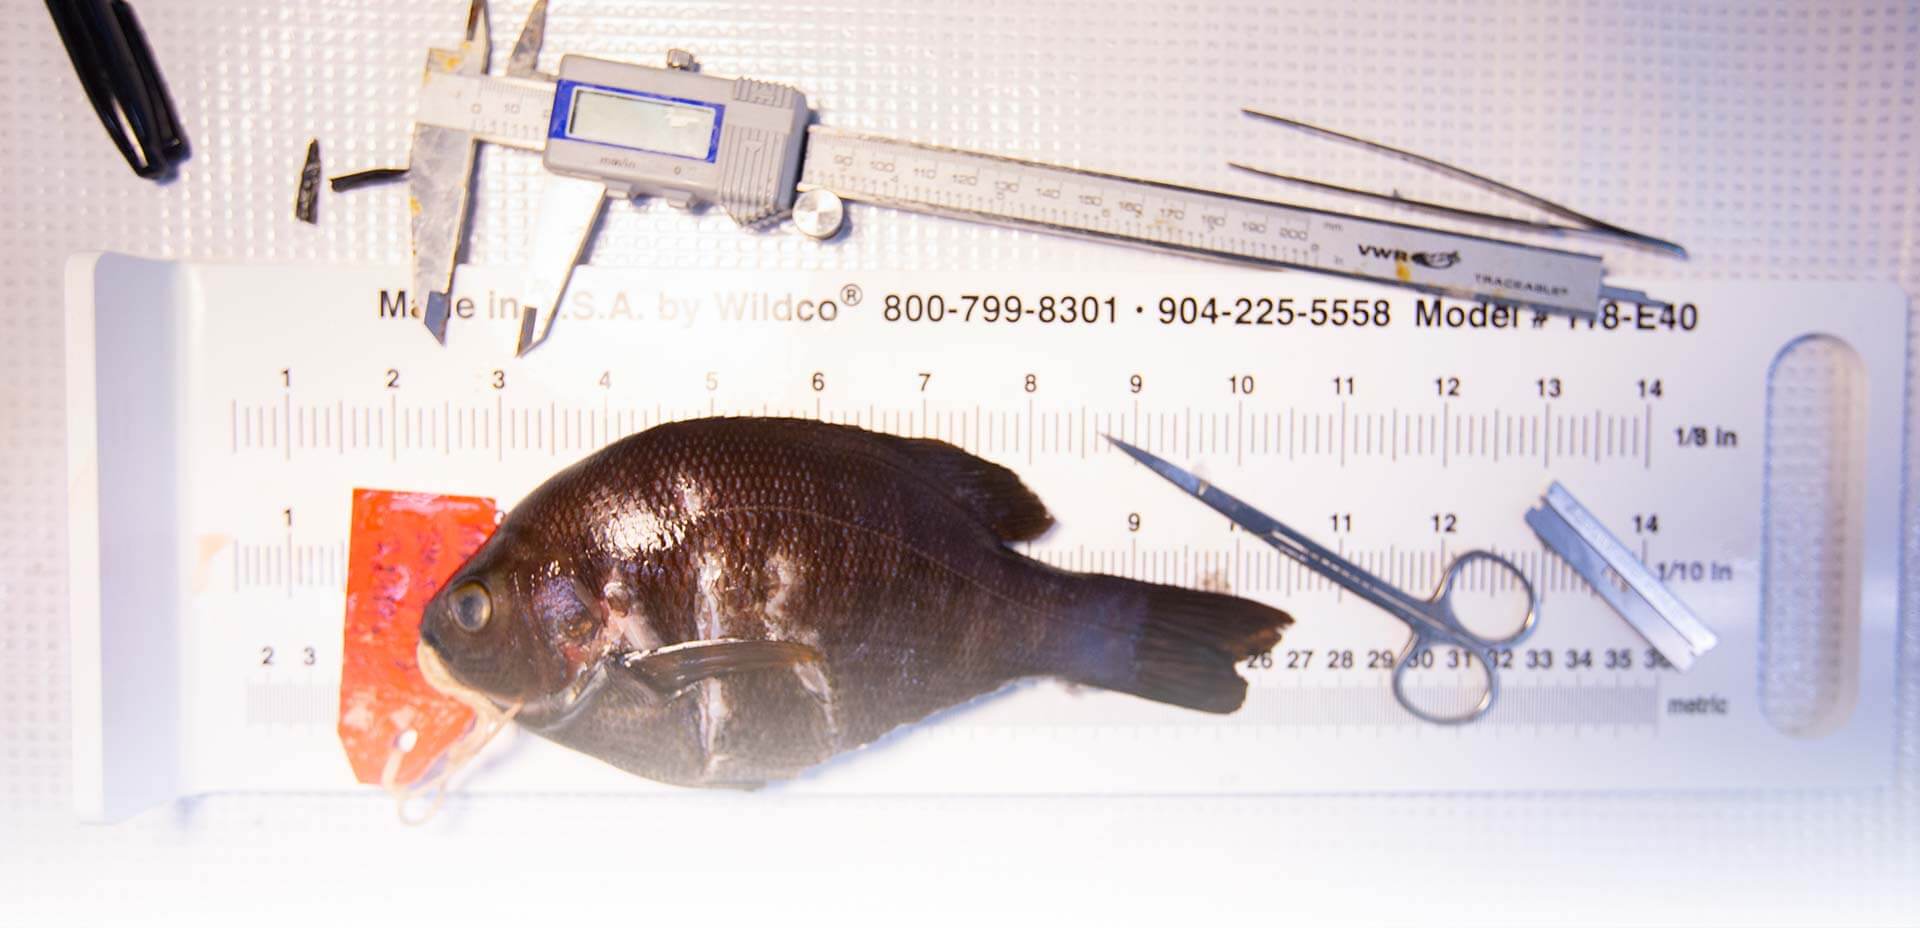 Surfperch specimen on table surrounded by measuring and disecting tools.